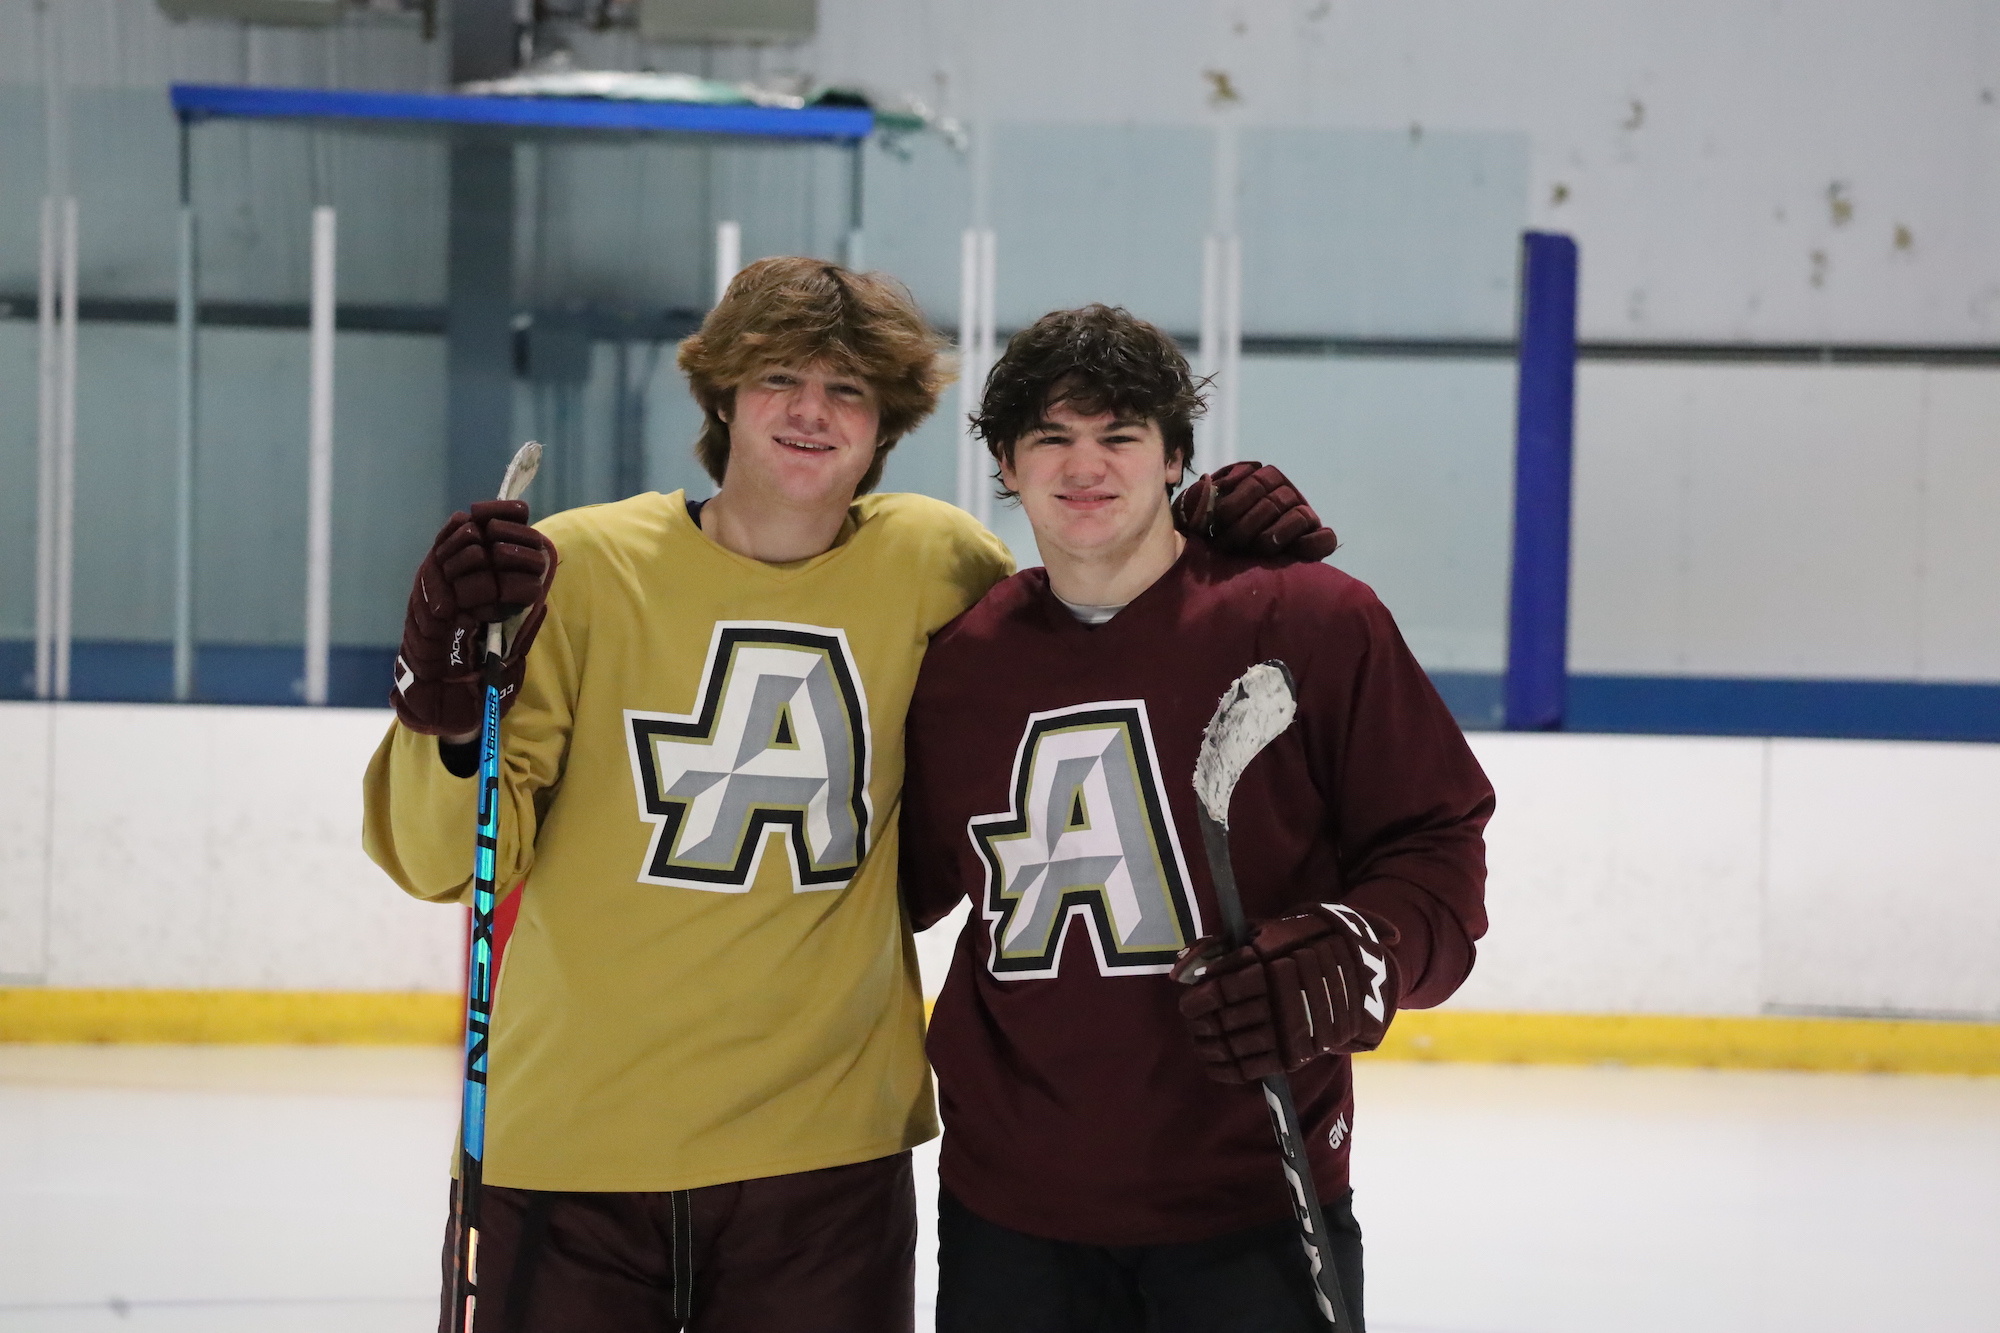 Algonquin boys hockey features five sets of brothers